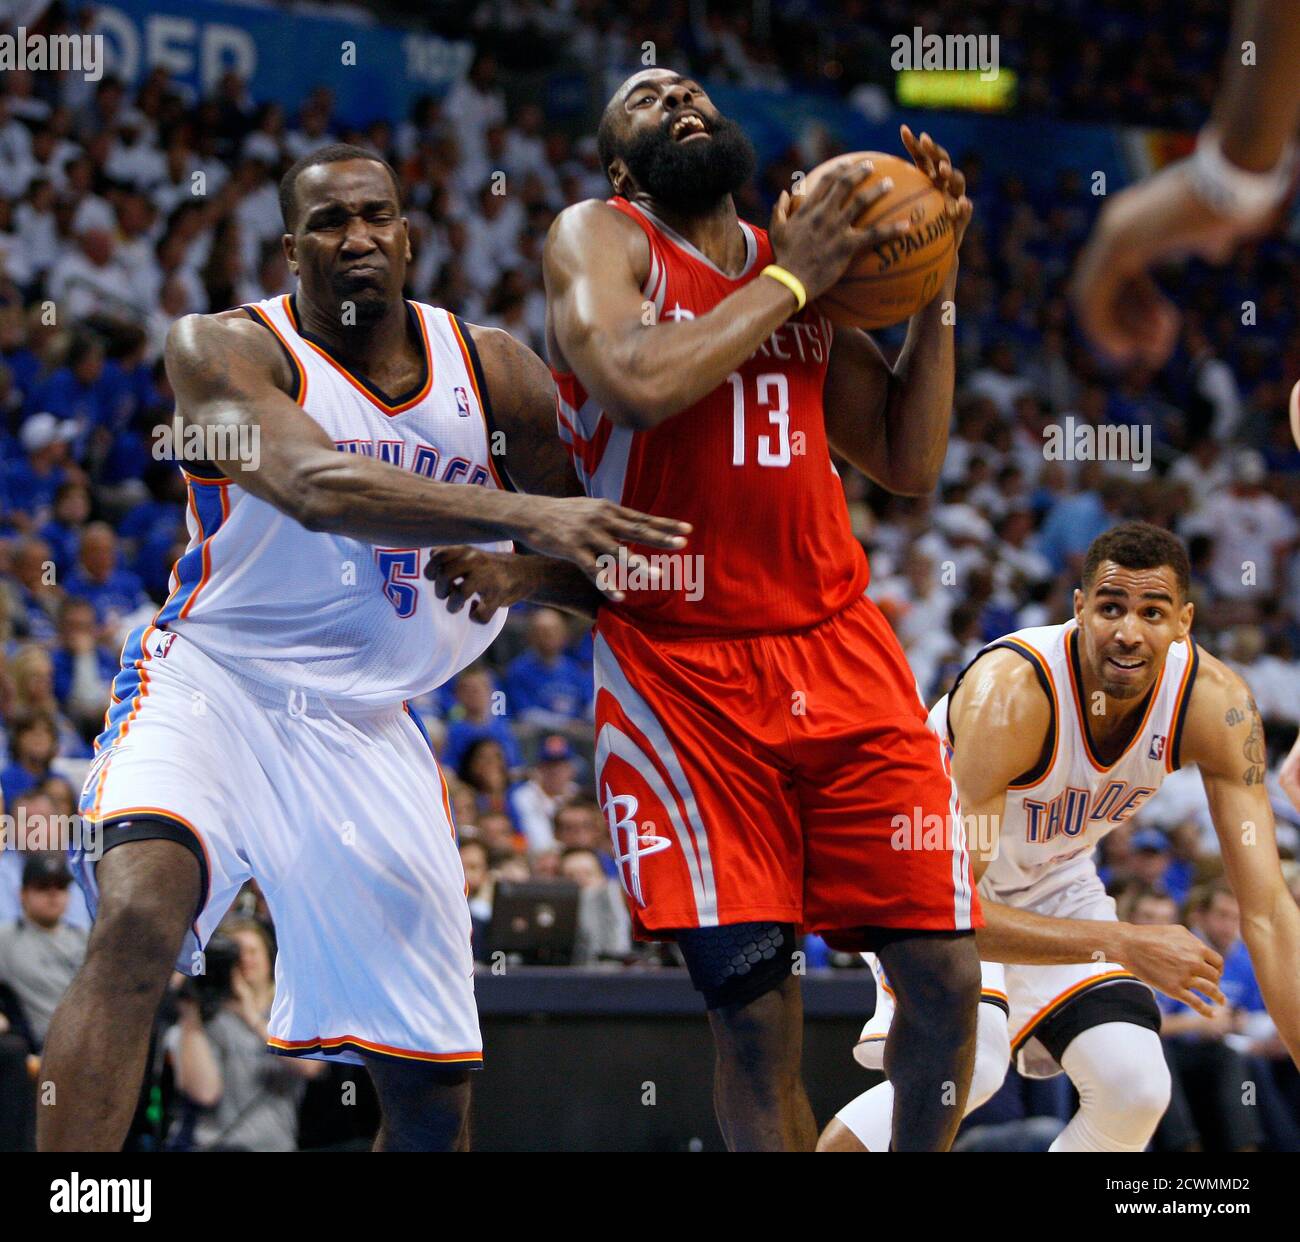 Houston Rockets guard James Harden (C) is fouled by Oklahoma City Thunder  center Kendrick Perkins (L) as Thunder guard Thabo Sefolosha of Switzerland,  (R) looks on in the second half of their